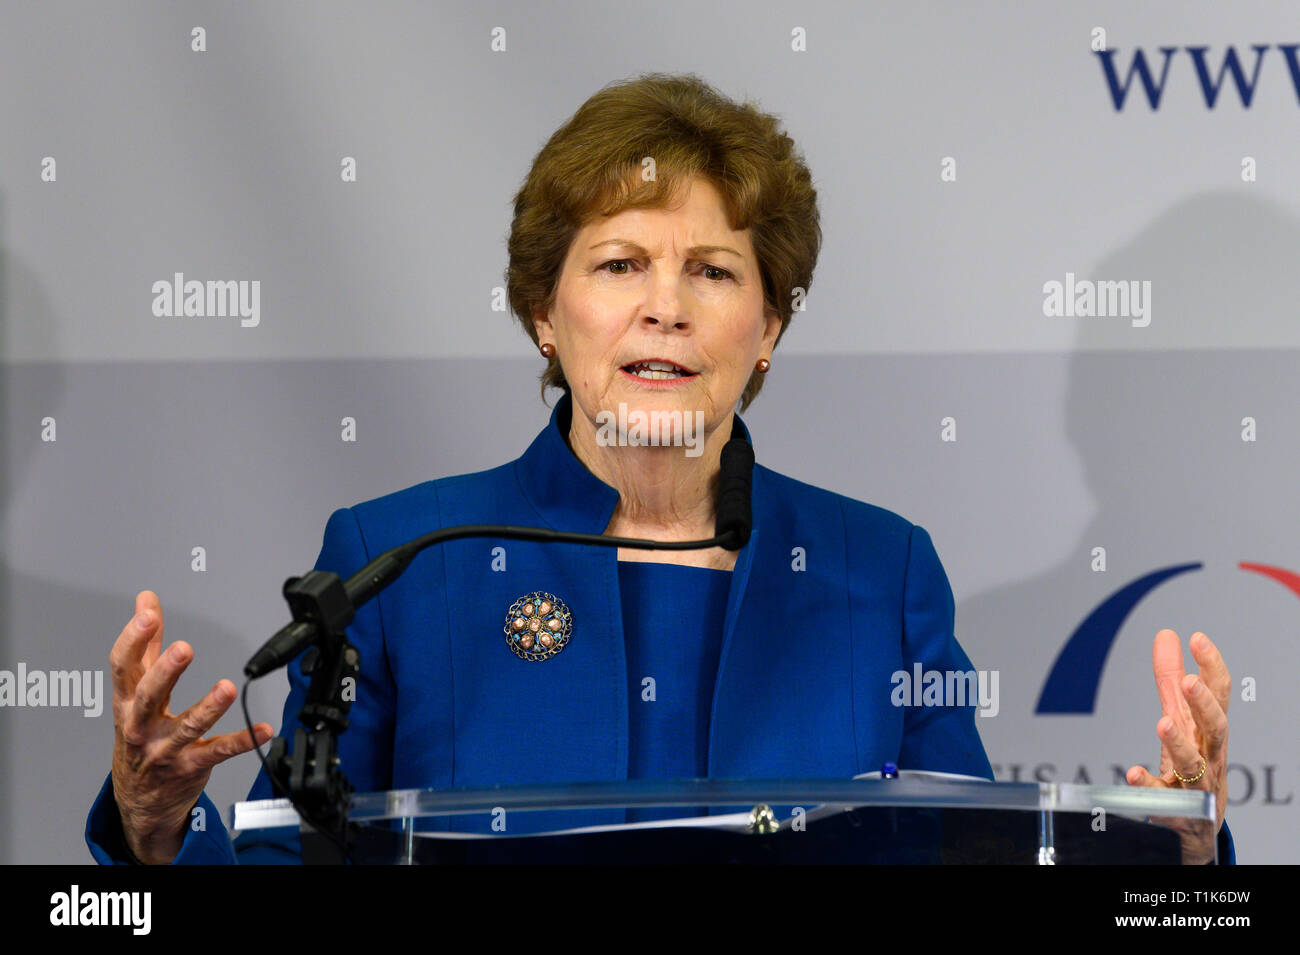 Washington, DC, USA. 26th Mar, 2019. U.S. Senator Jeanne Shaheen (D-NH) seen speaking during a program titled ''Tracking Federal Funding to Combat the Opioid Crisis'' at the Bipartisan Policy Center in Washington, DC. Credit: Michael Brochstein/SOPA Images/ZUMA Wire/Alamy Live News Stock Photo